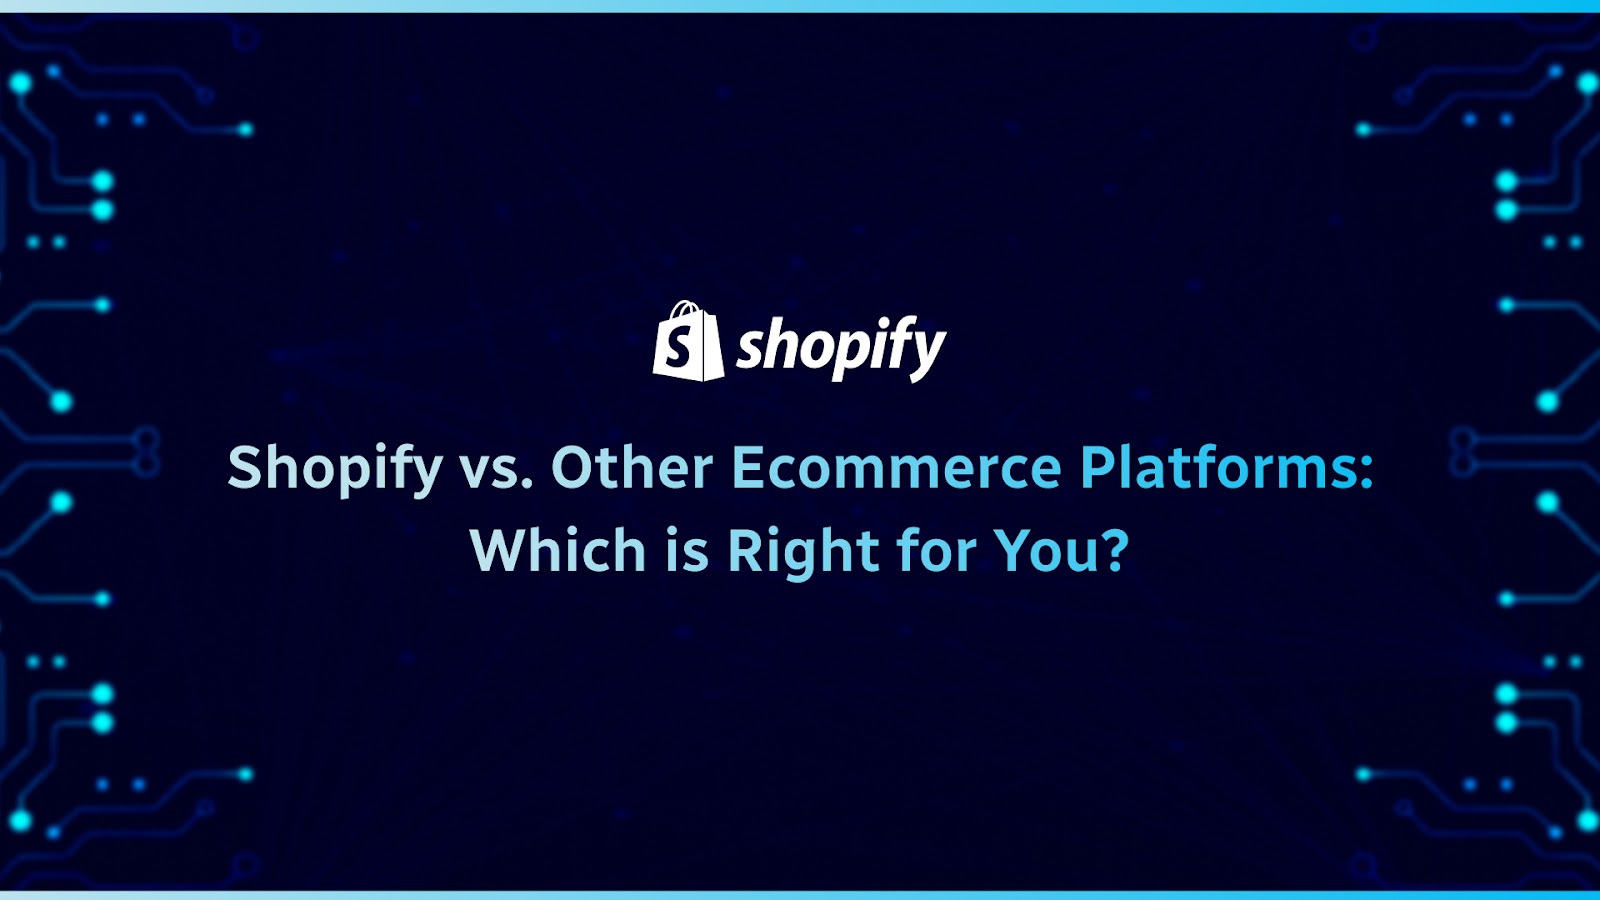 Shopify vs. Other E-commerce Platforms: Which is Right for You?